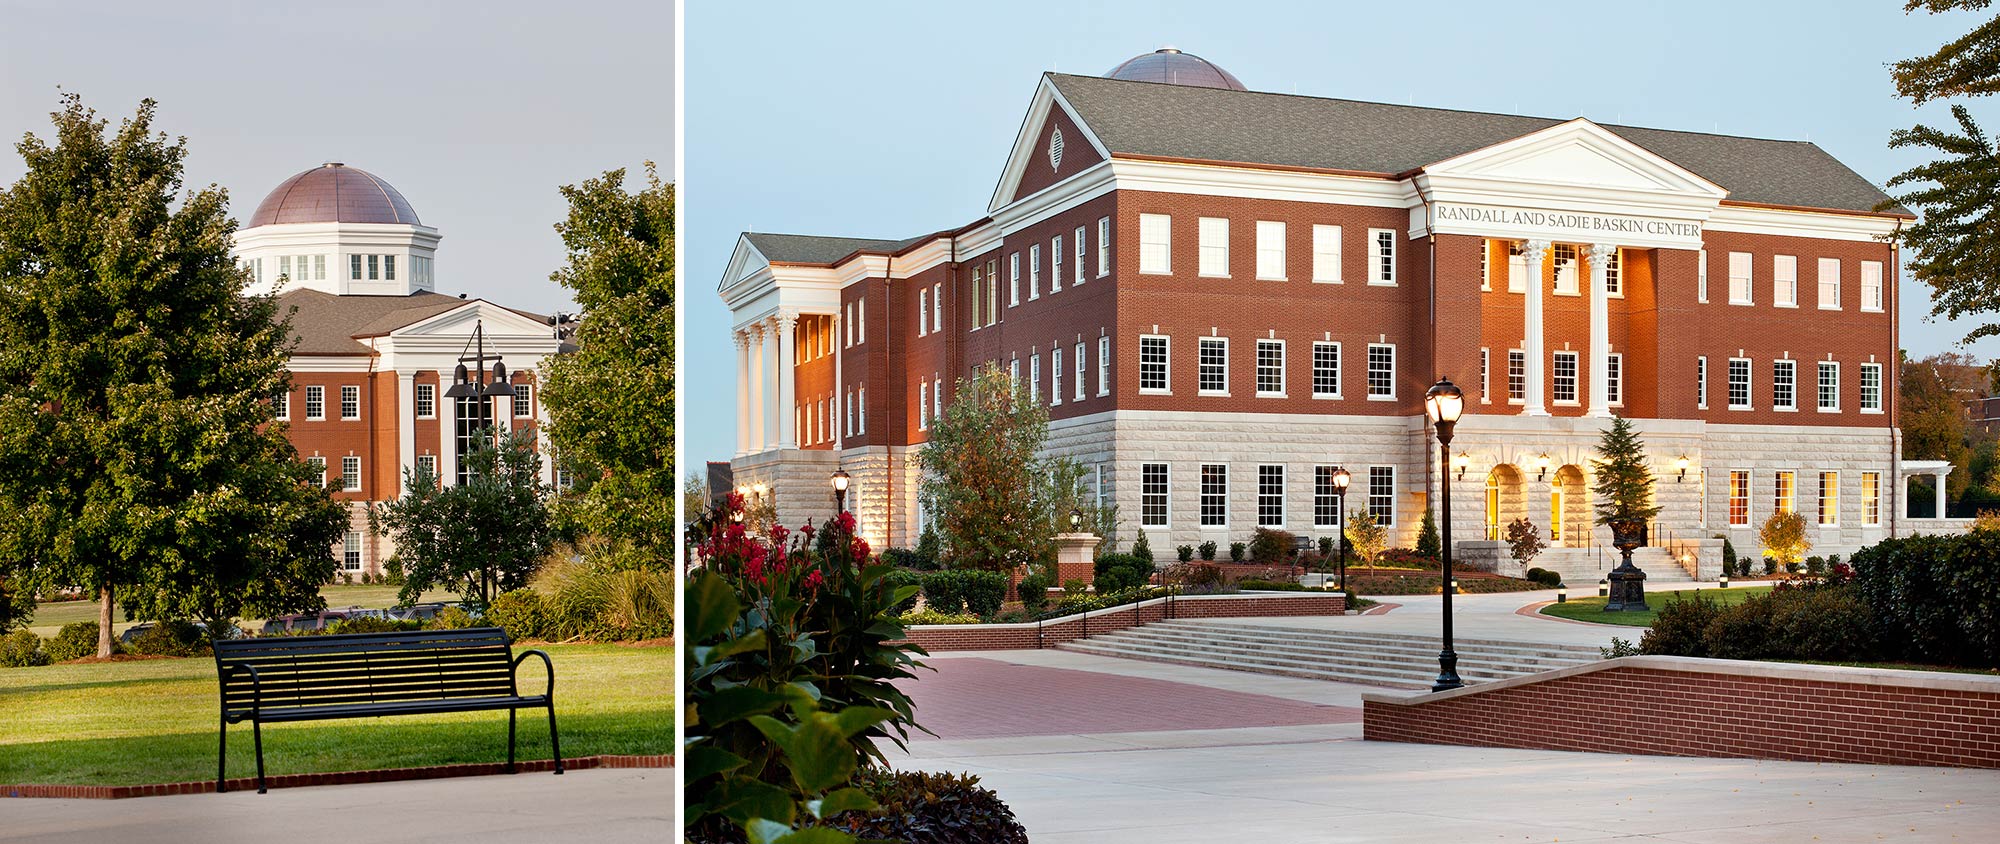 Belmont University, Randall and Sadie Baskin Center-College of Law